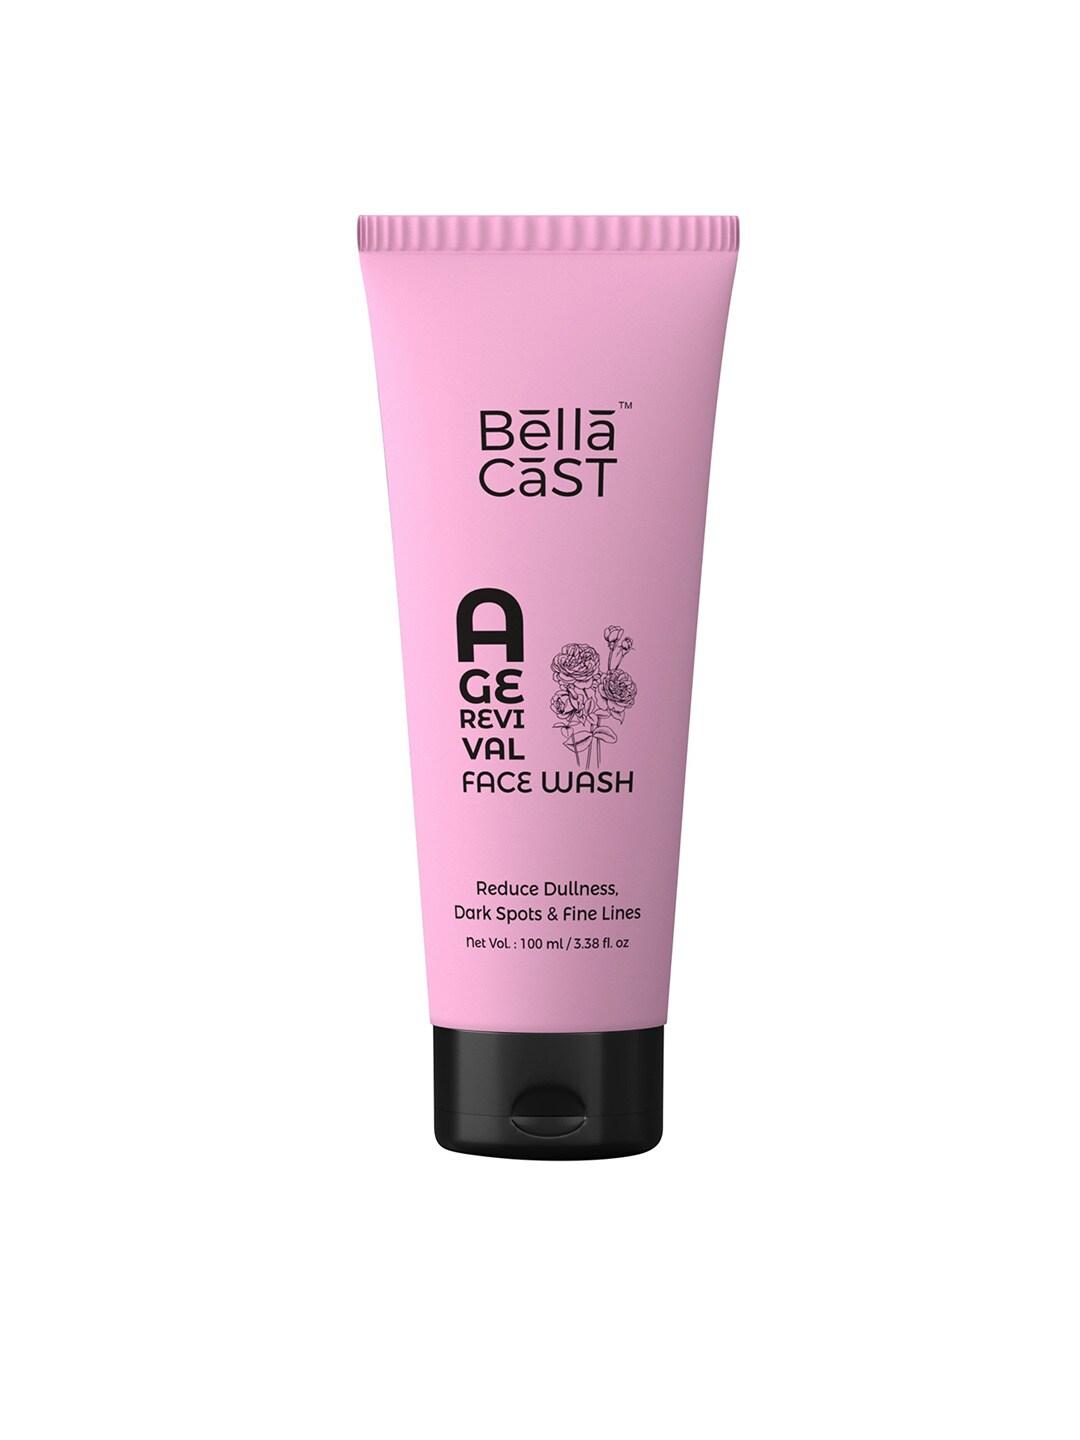 BellaCast Age Revival Face Wash For Dullness Dark Spots Gentle Cleansing - 100ml